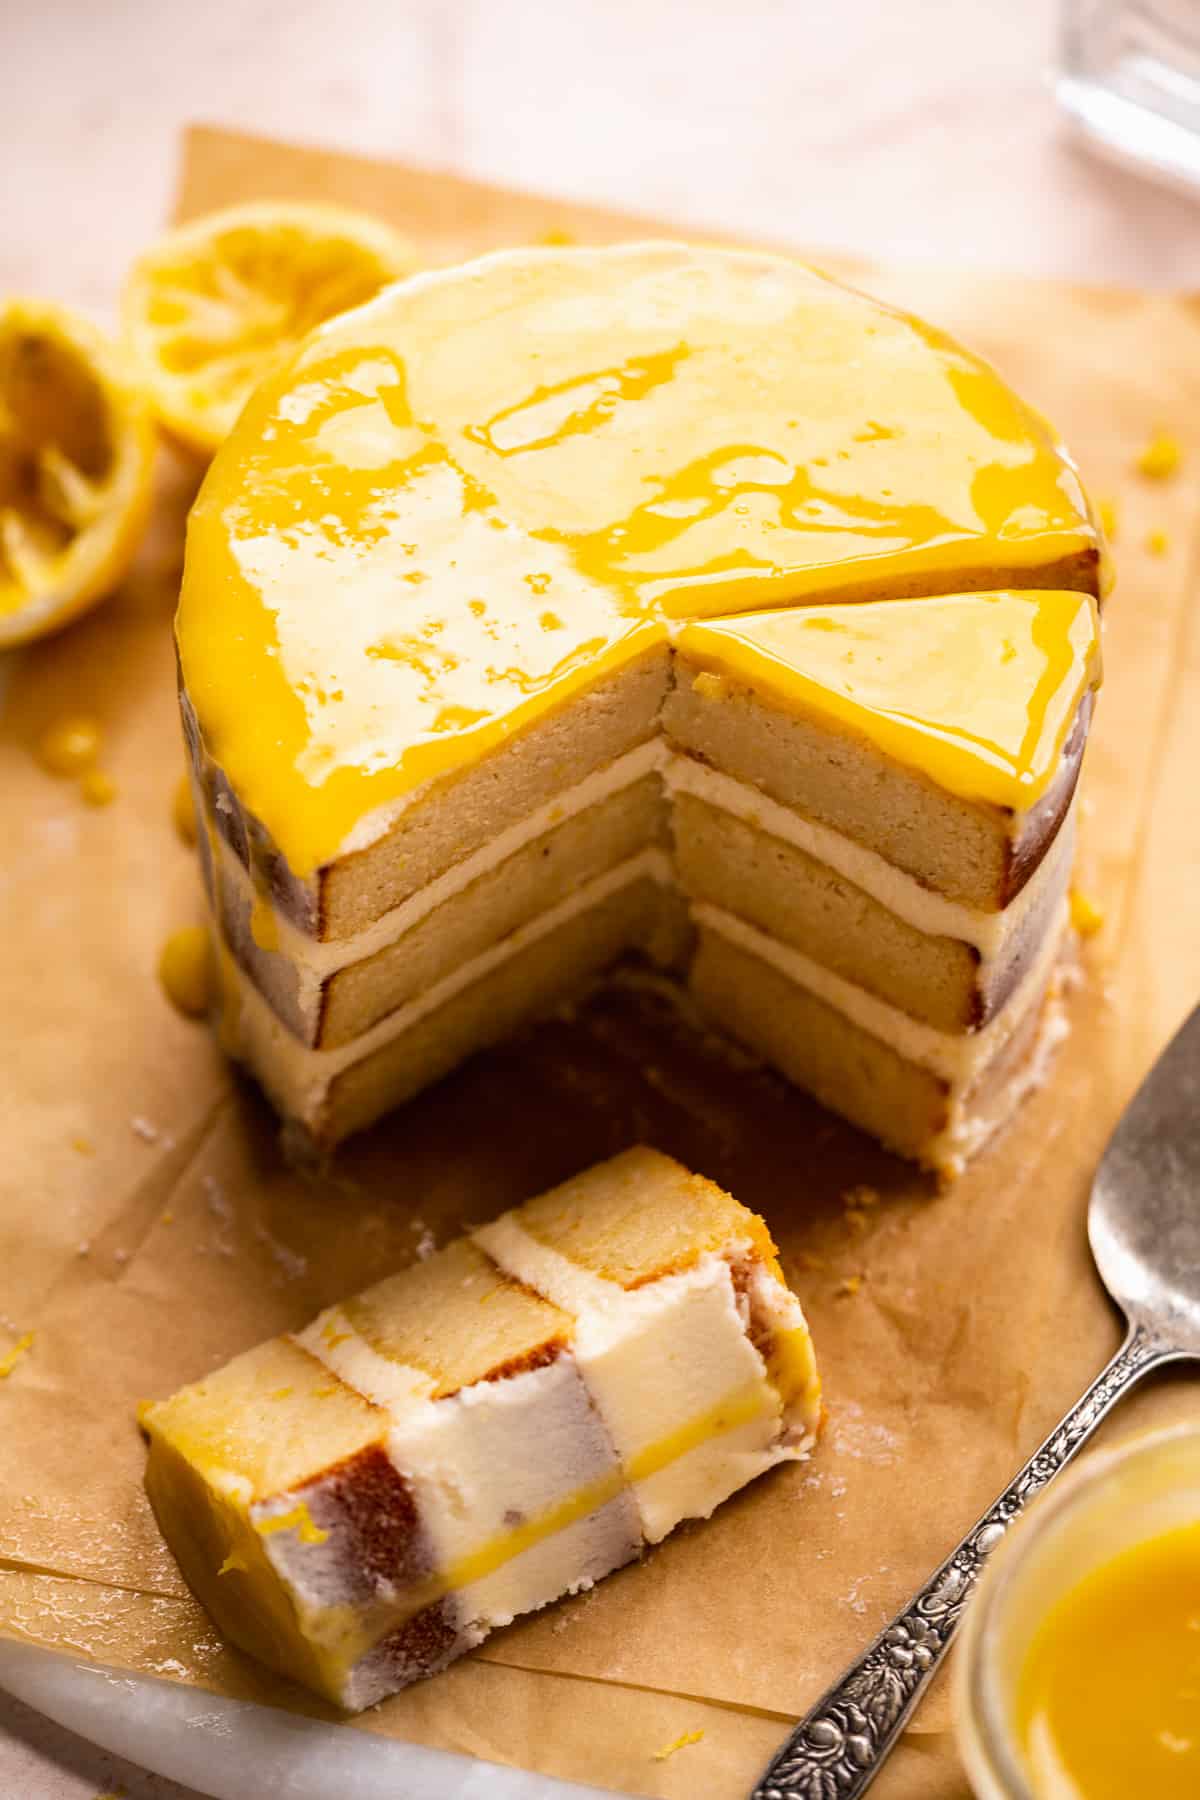 Lemon cake sliced with pieces scattered on surface and drizzle on top.